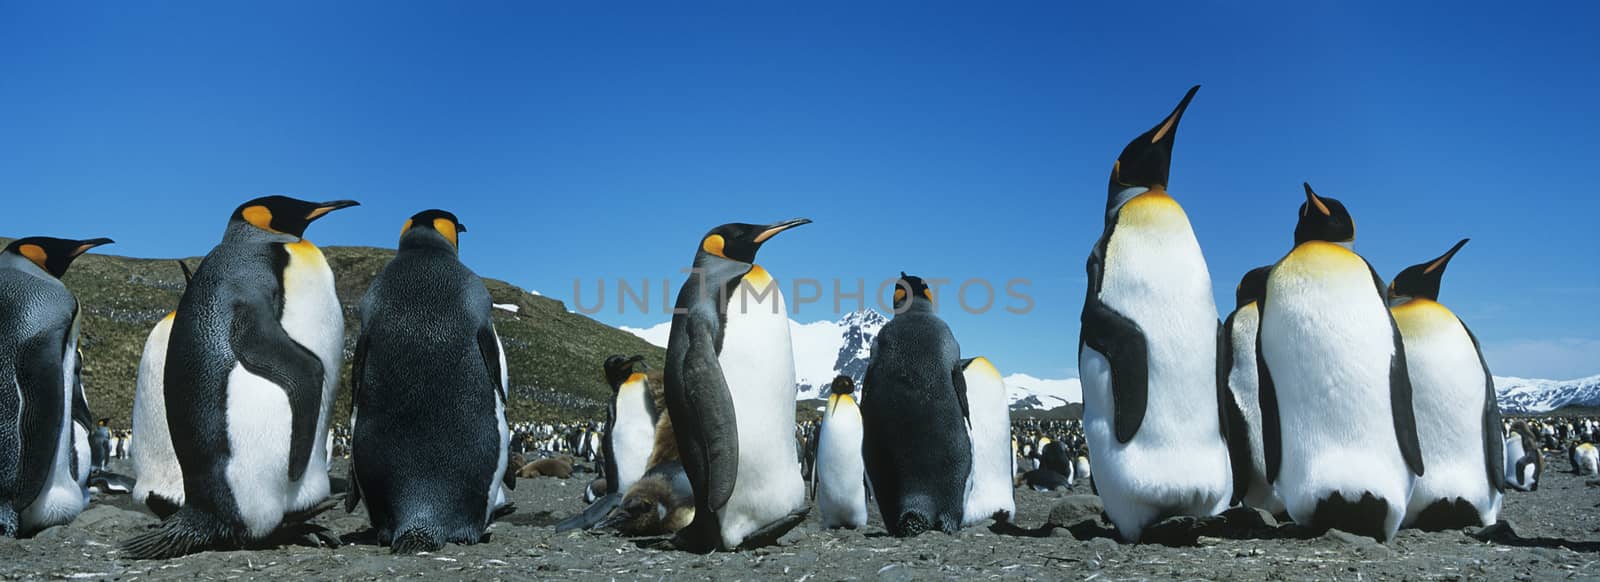 Colony of Penguins by moodboard